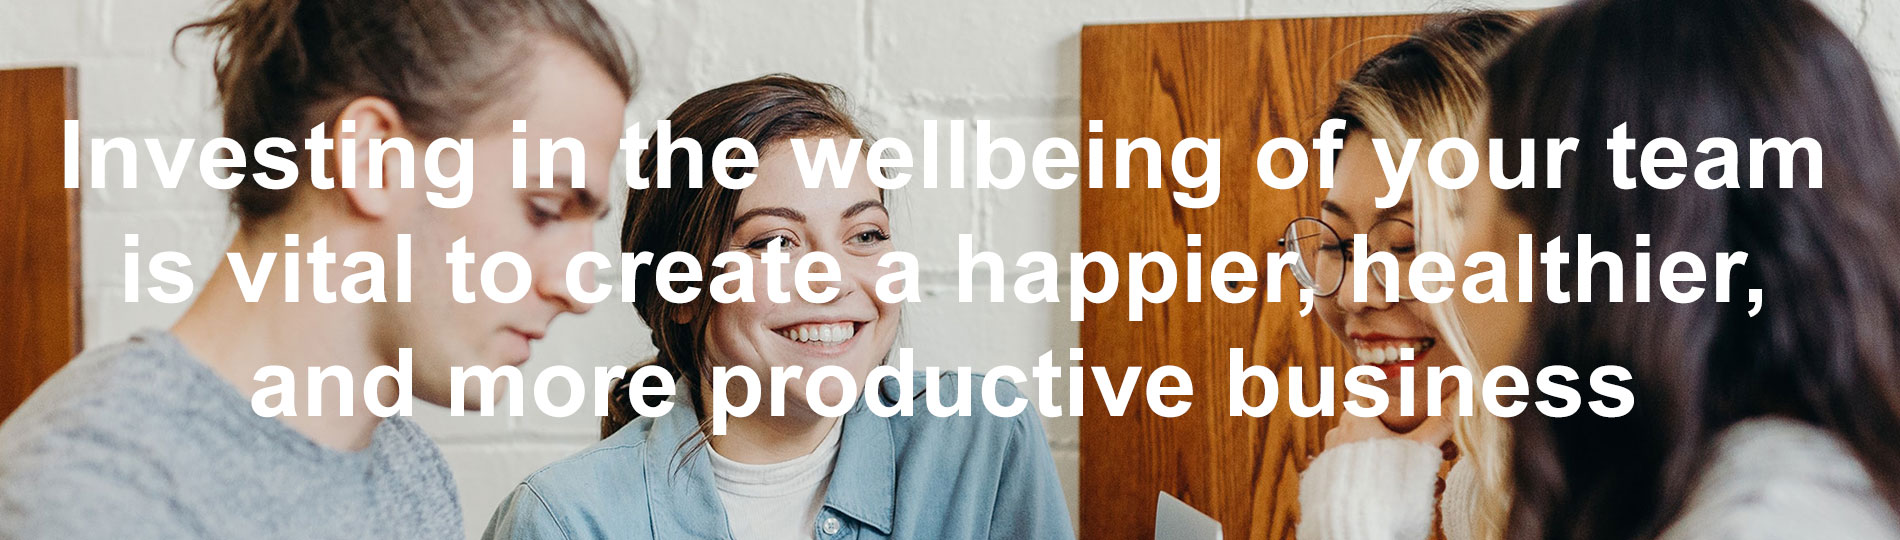 Investing in the wellbeing of your team is vital to create a happier, healthier, and more productive business